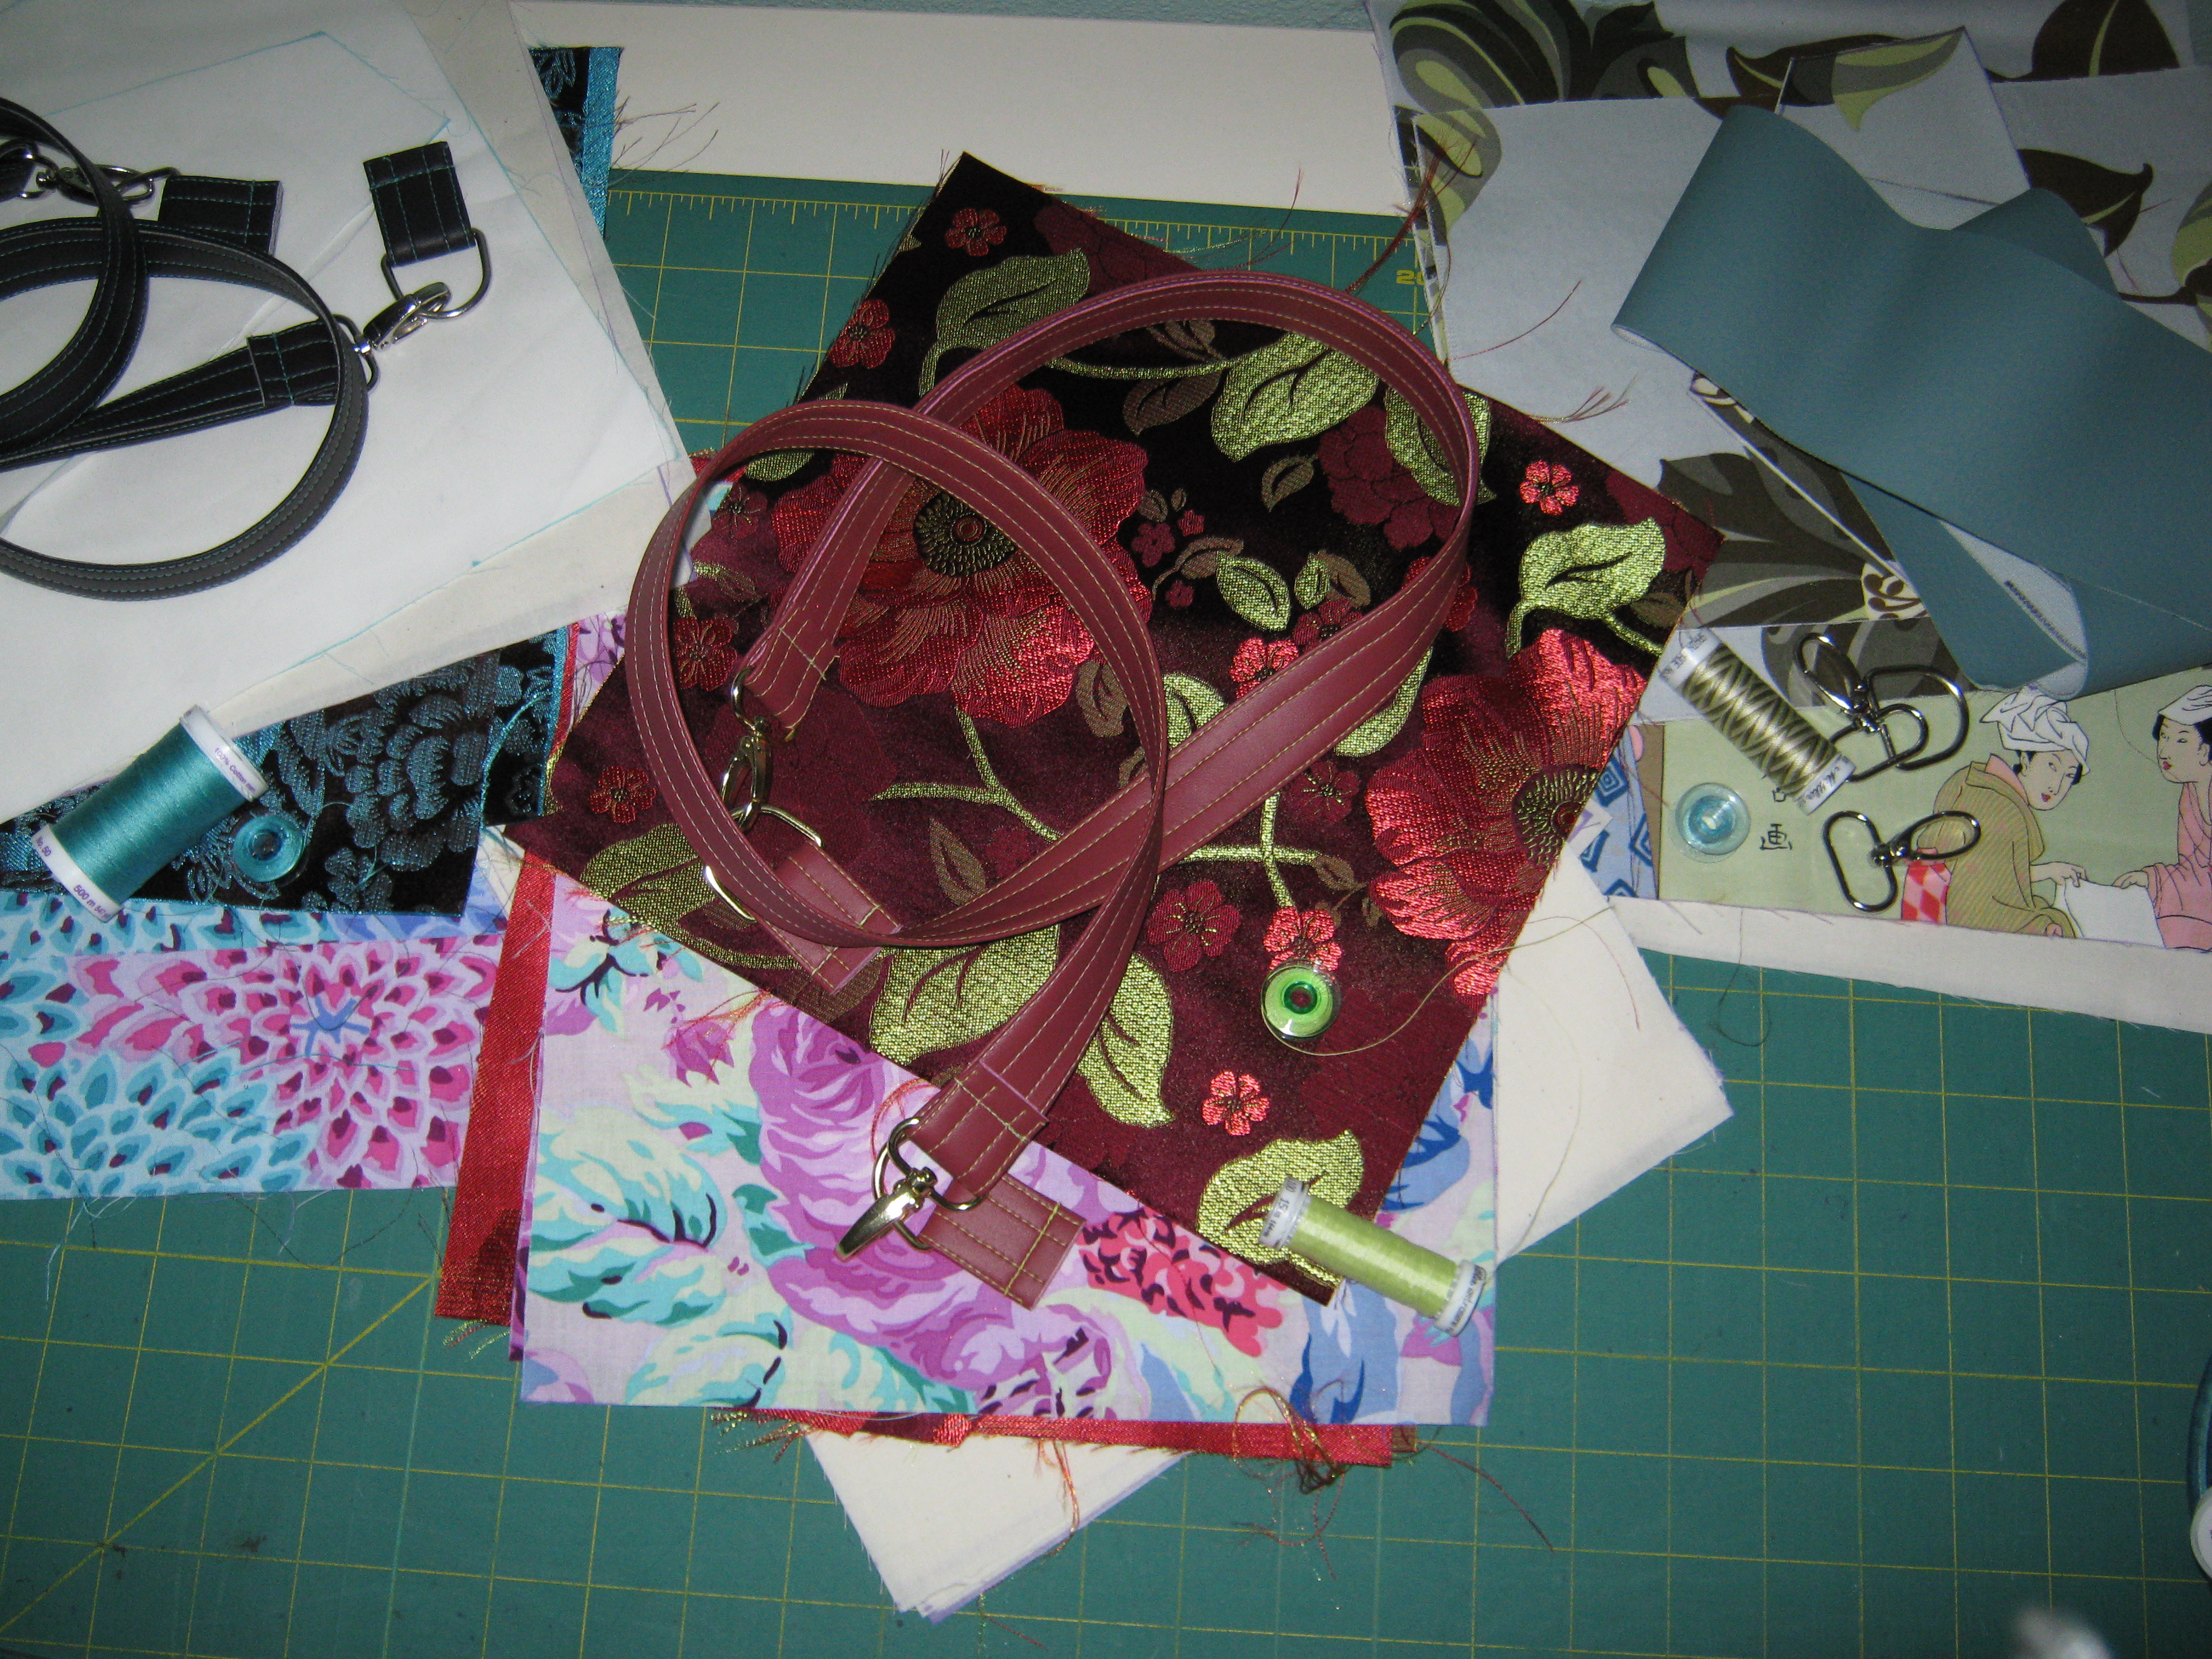 Here are the materials for 3 new Tiny Bags